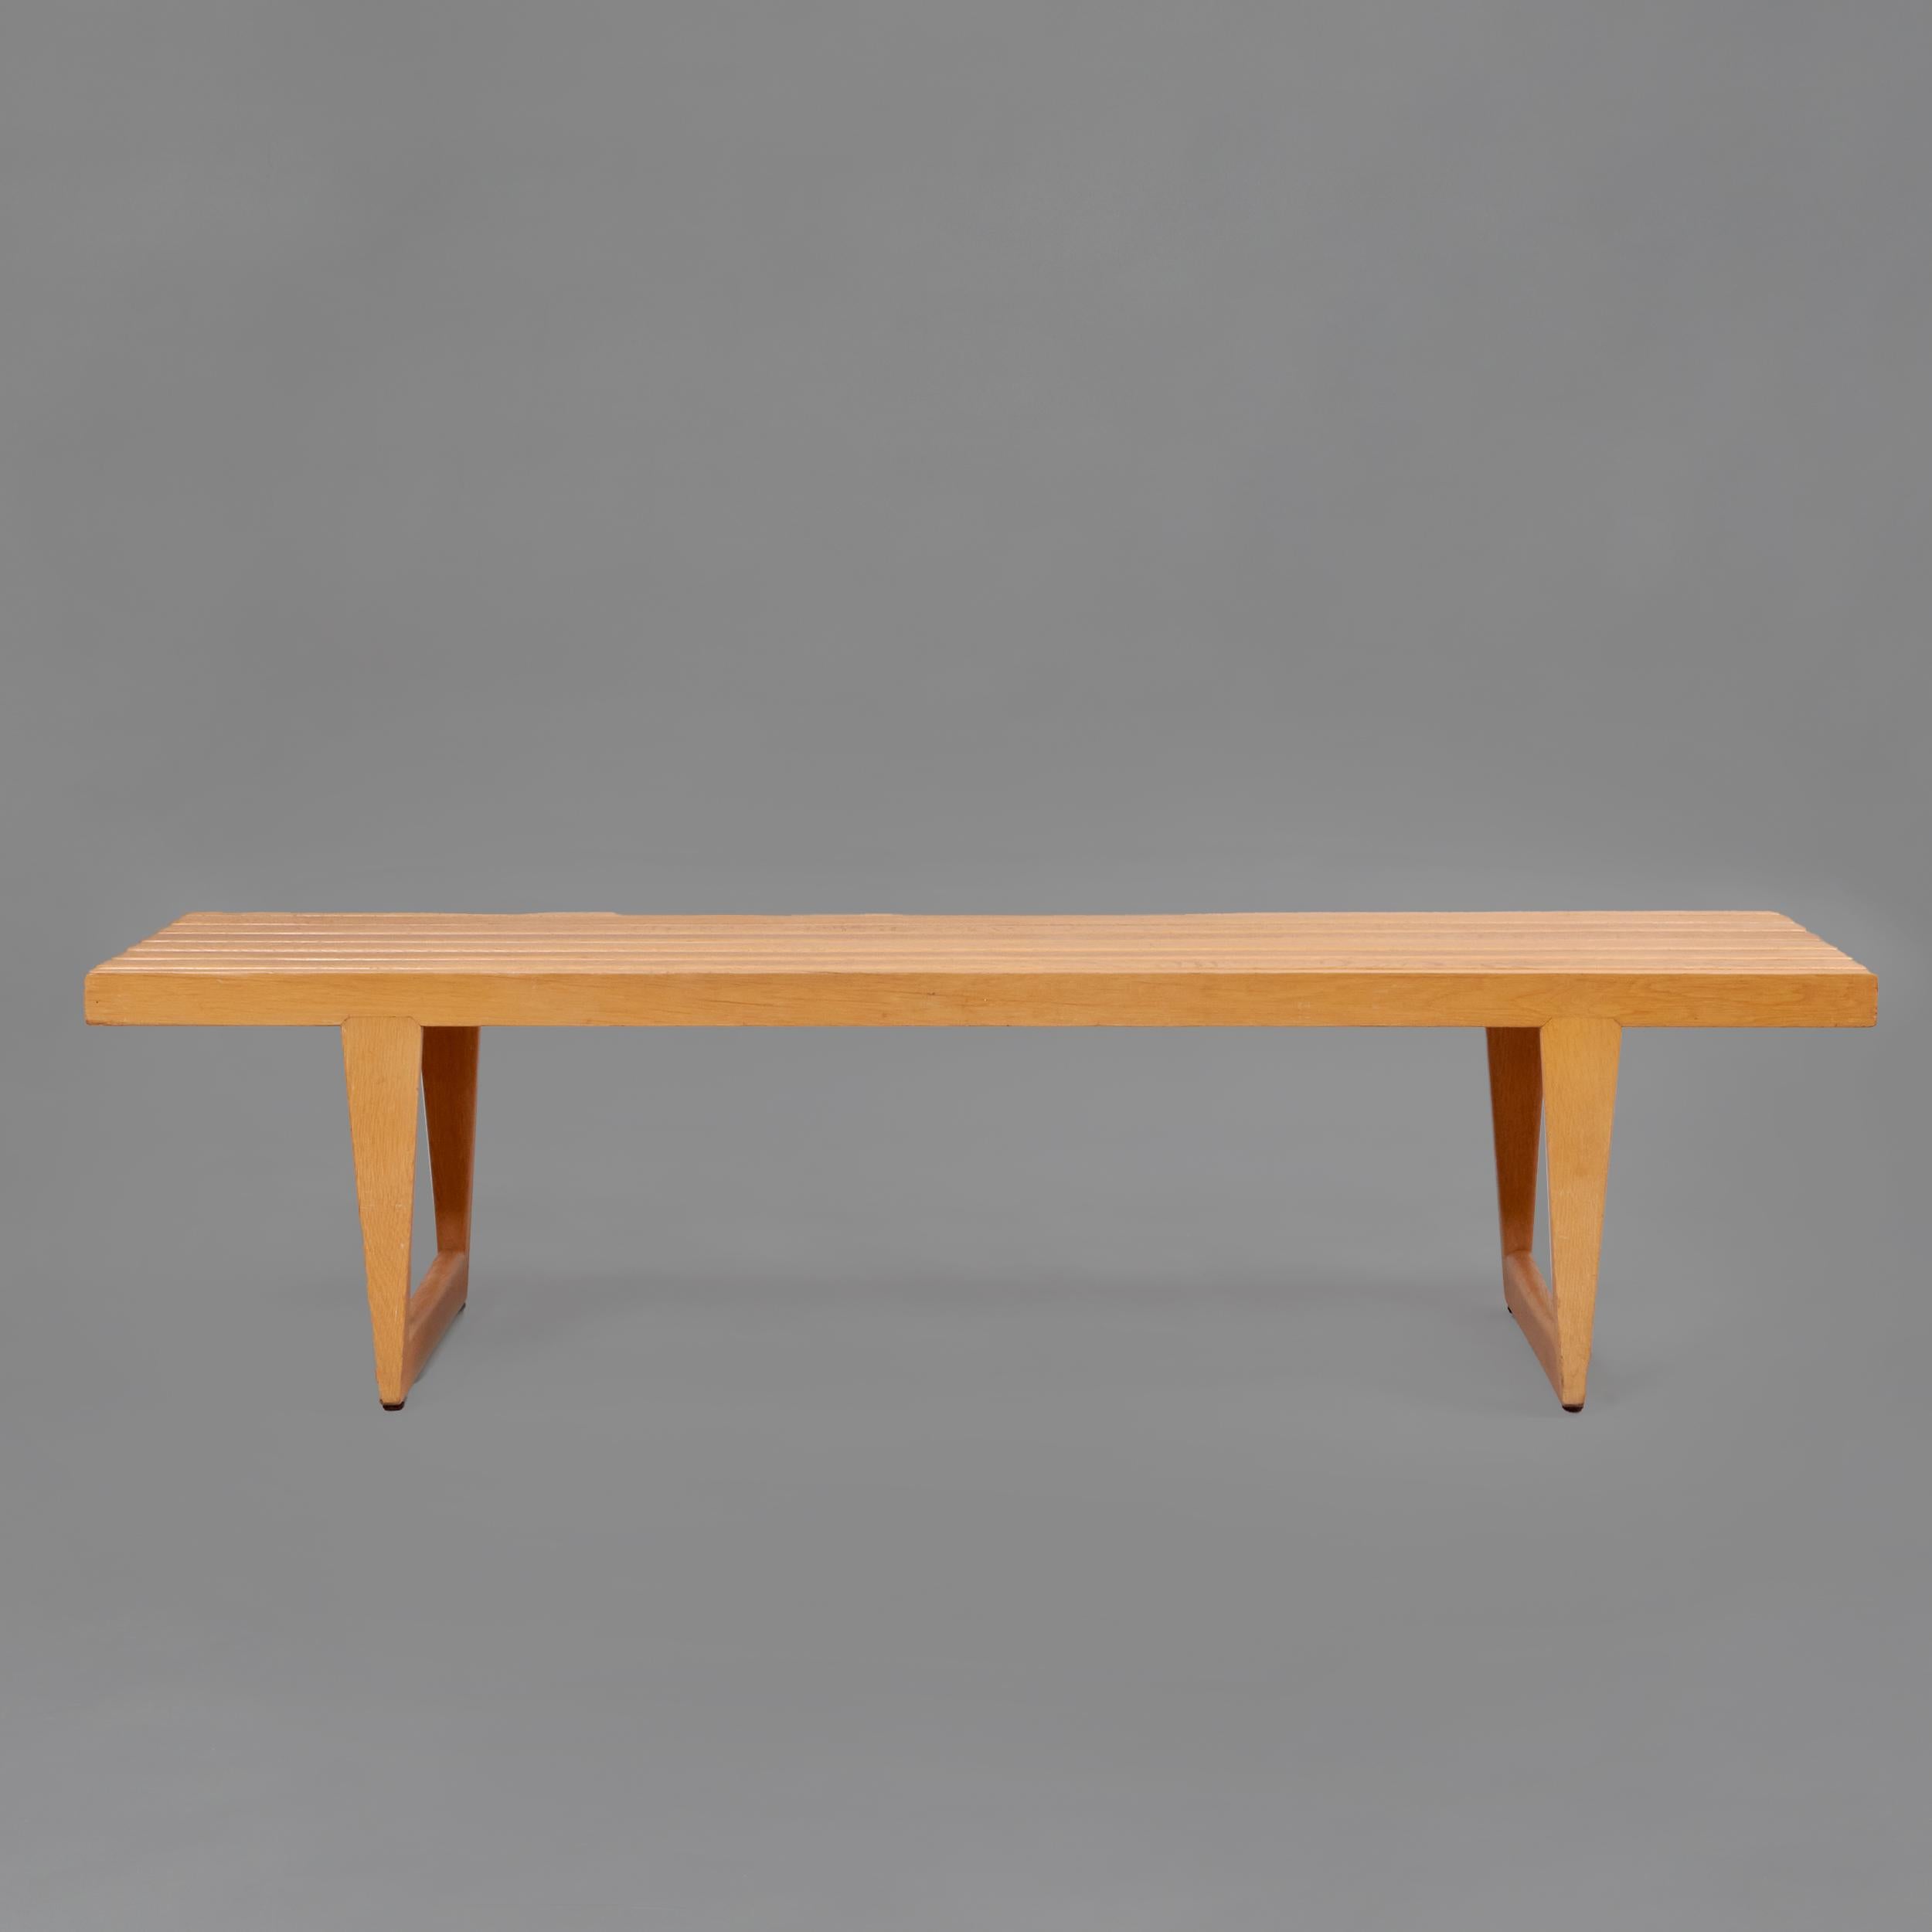 Tokyo Bench designed by Yngvar Sandström for Nordiska Kompaniet in Oak. Sweden, 60s.

Excellent restored condition that might present slight traces of use. We have available a smaller version (See pictures)

Nordiska Kompaniet was, and continues to